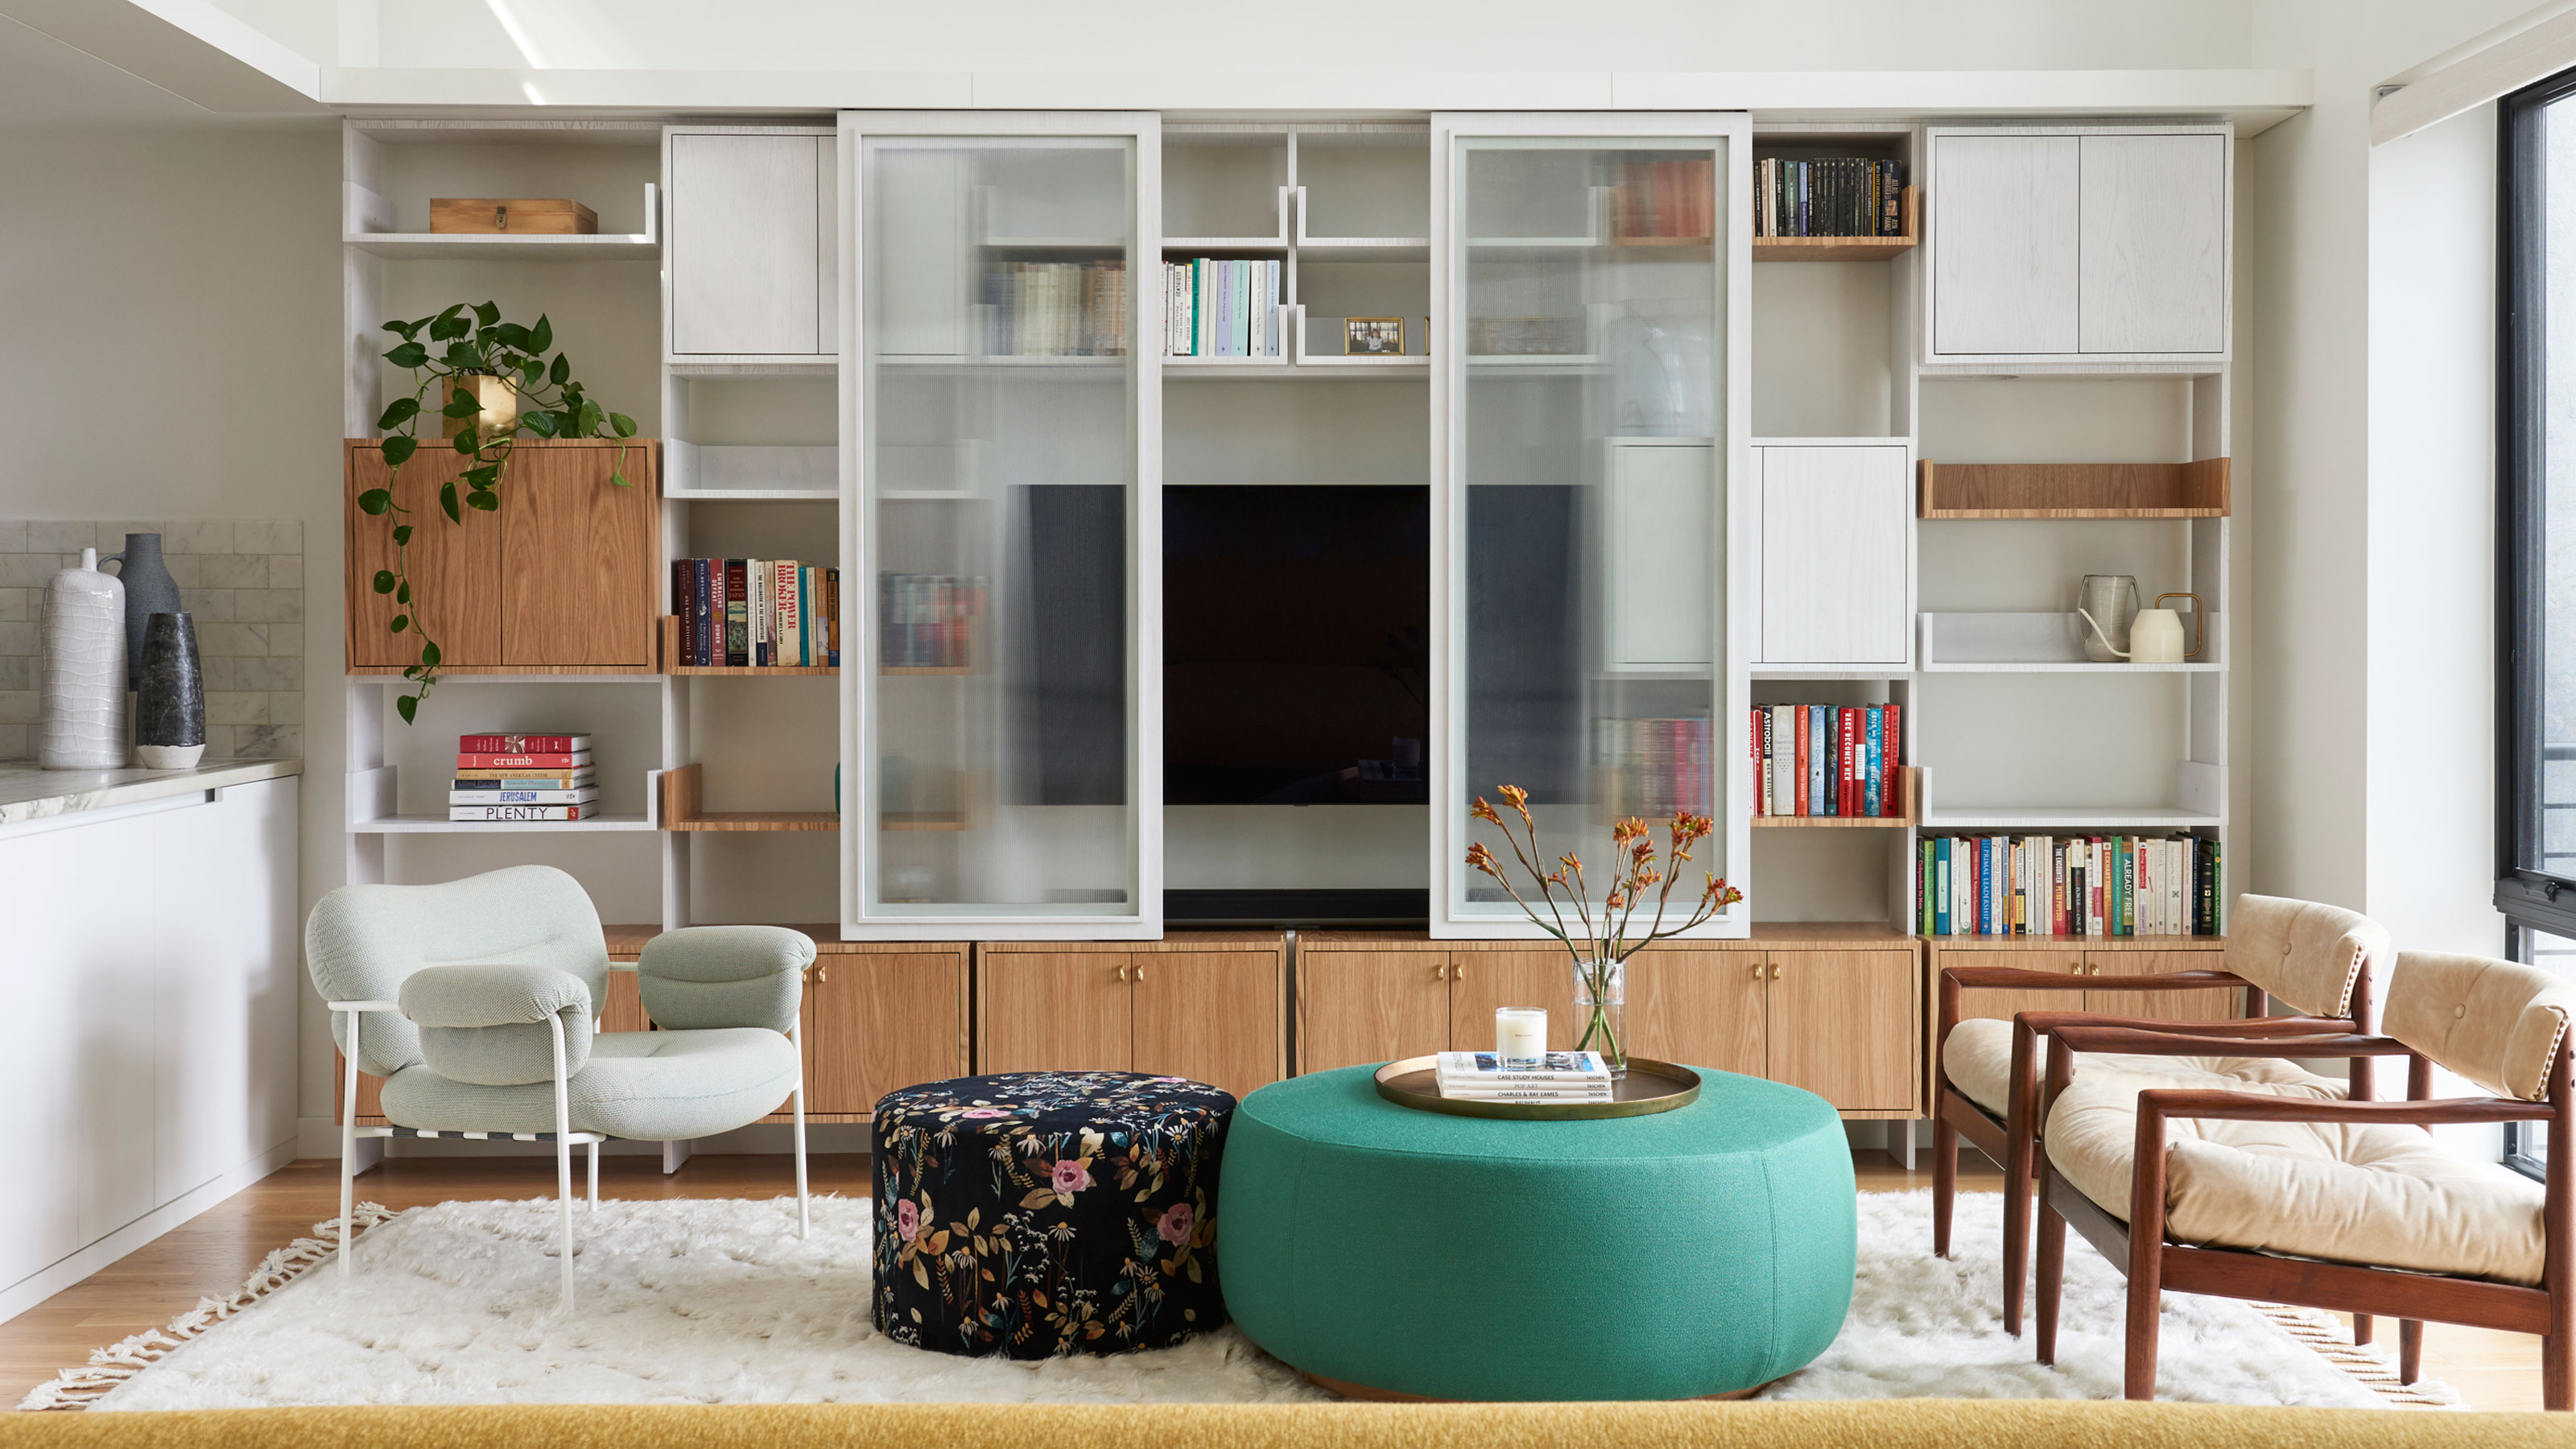 This apartment interior is filled with creative storage and decor